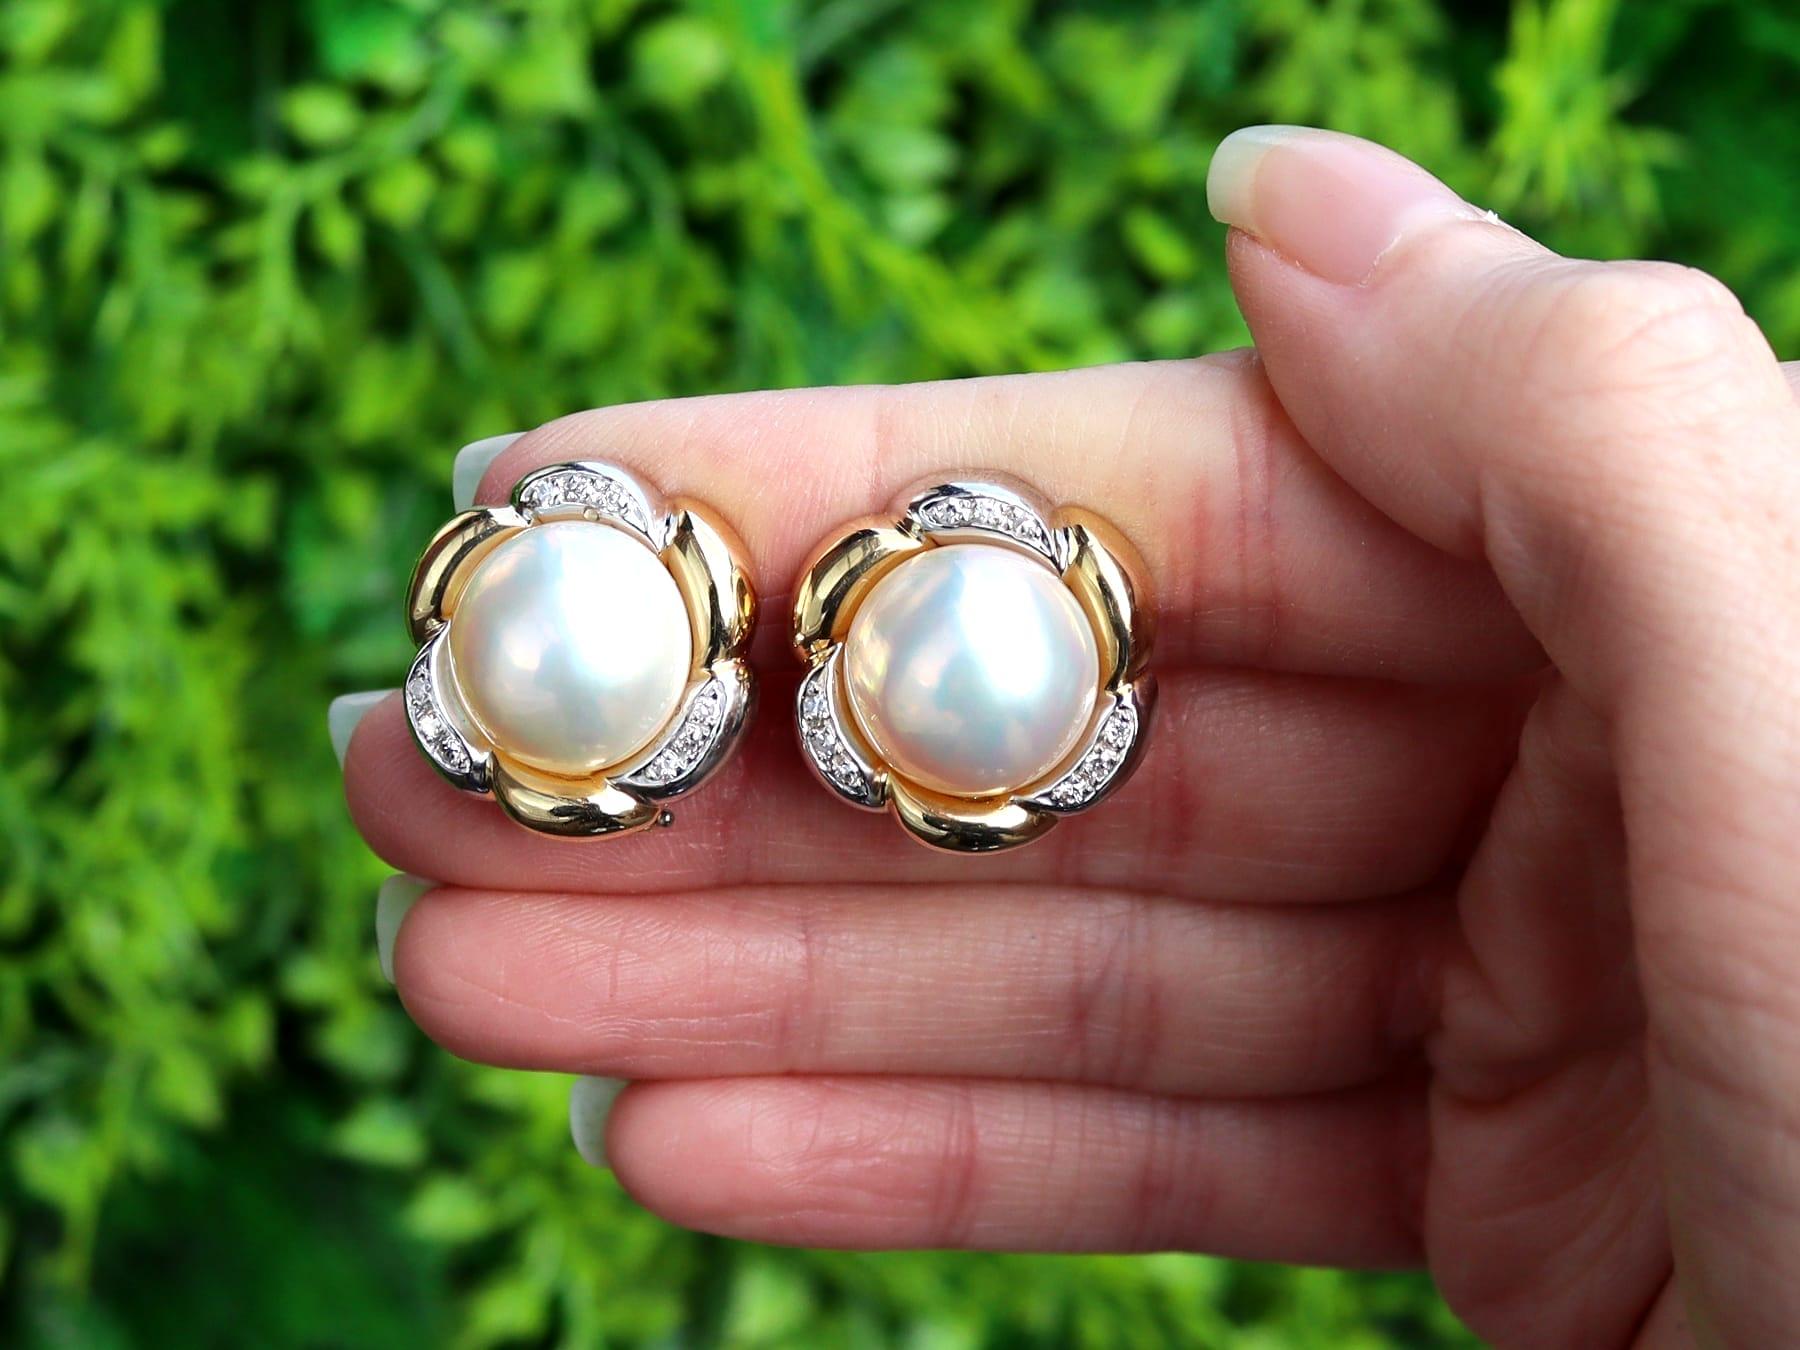 An impressive pair of vintage mabe pearl and 0.18 carat diamond, 18 karat yellow and white gold earrings; part of our diverse pearl jewelry and estate jewelry collections.

These fine and impressive vintage pearl earrings have been crafted in 18k